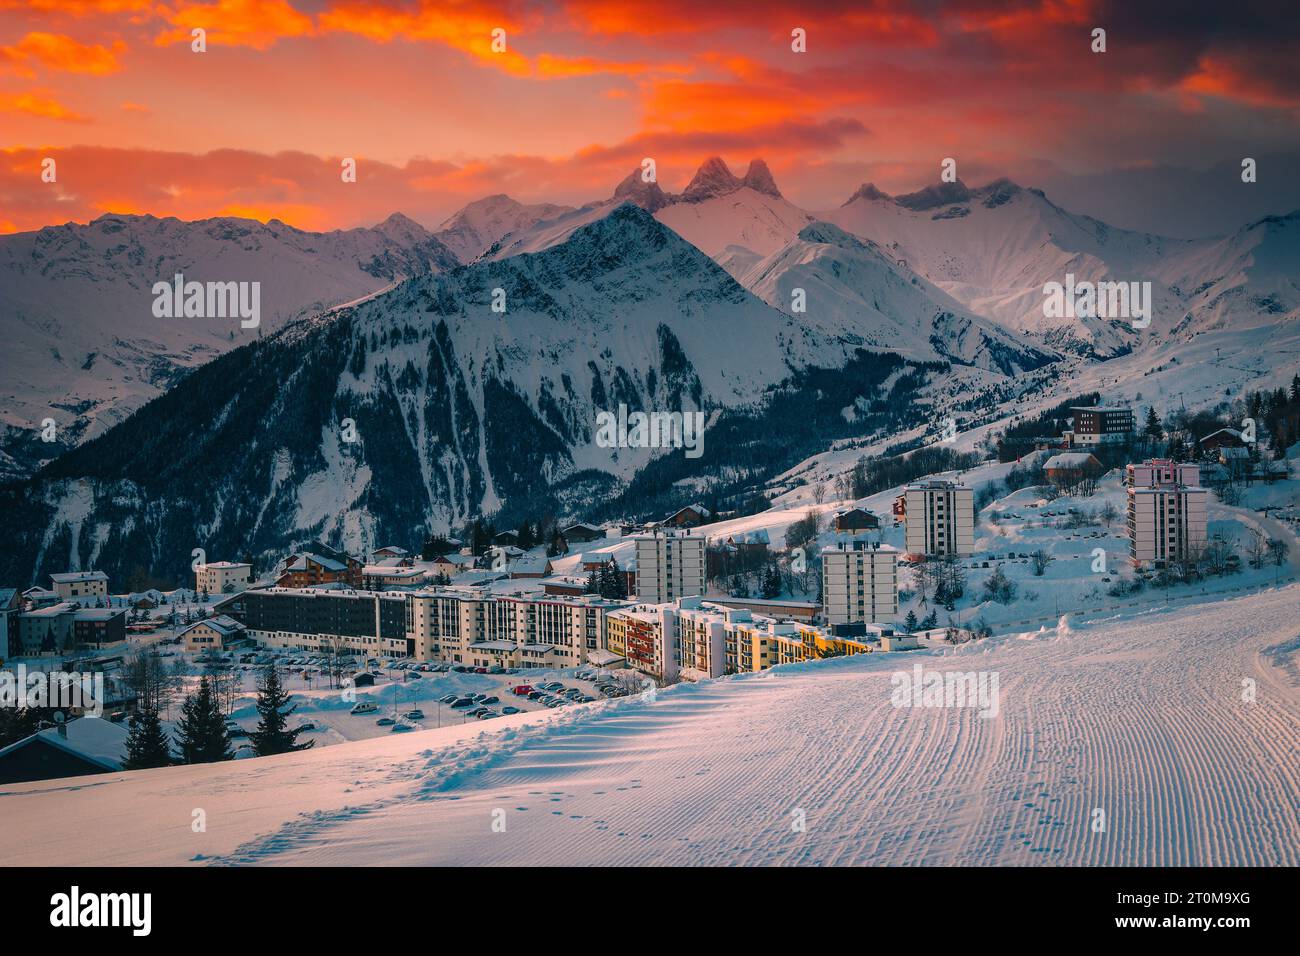 Majestic winter mountain resort with modern buildings at sunrise, La Toussuire, France, Europe Stock Photo